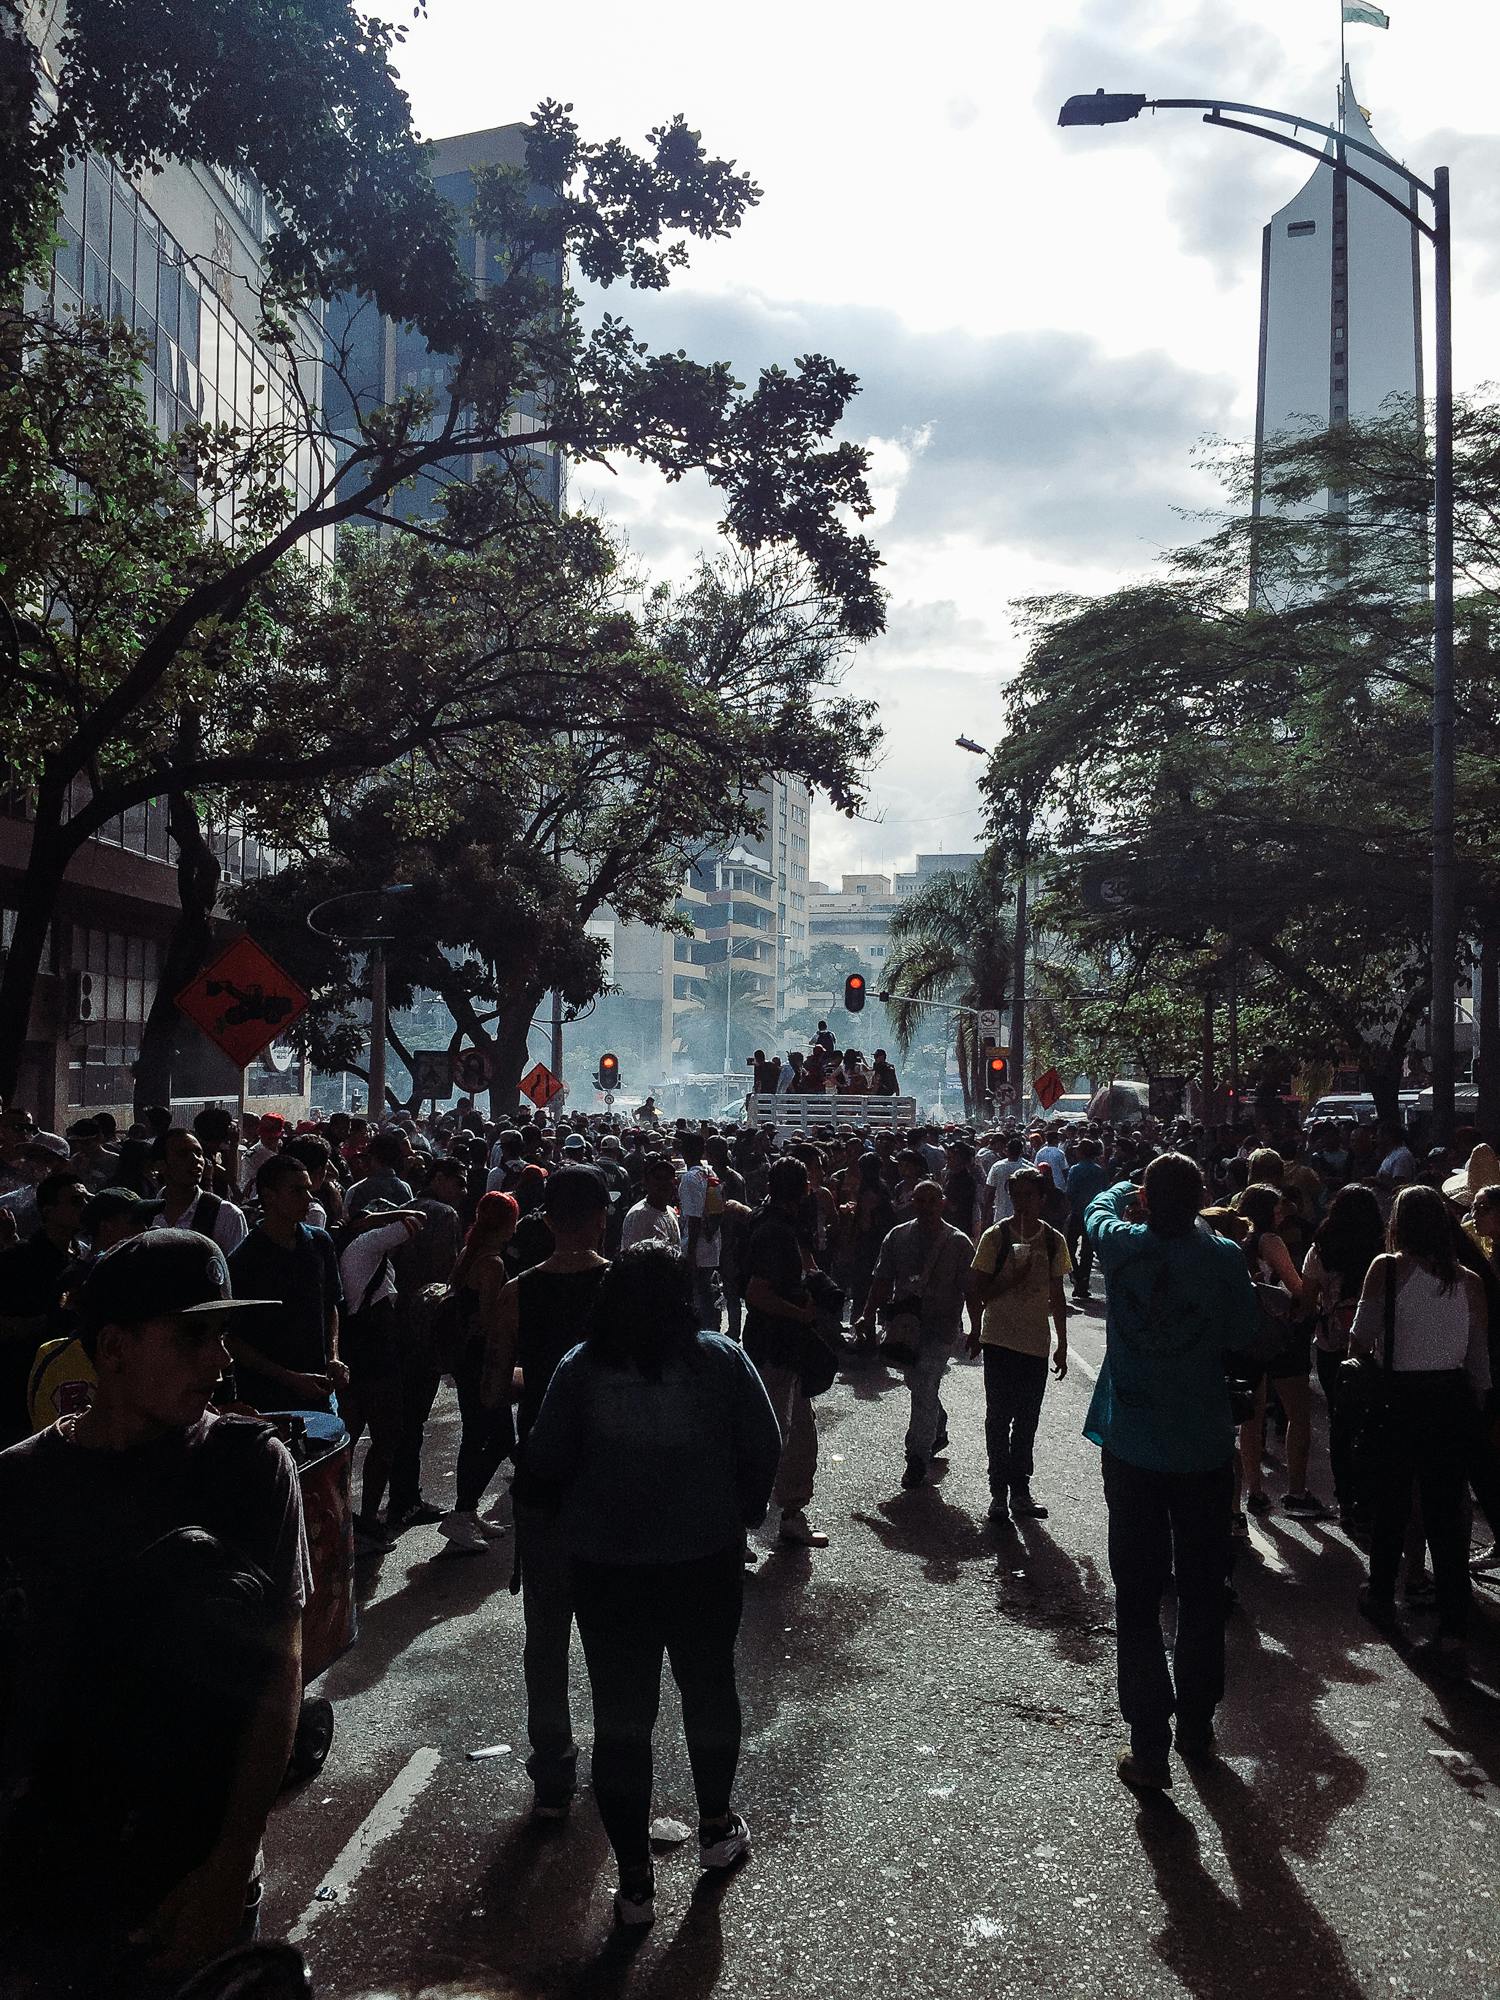 IMG 0610 We marched with 100,000 people in Colombia for cannabis reform